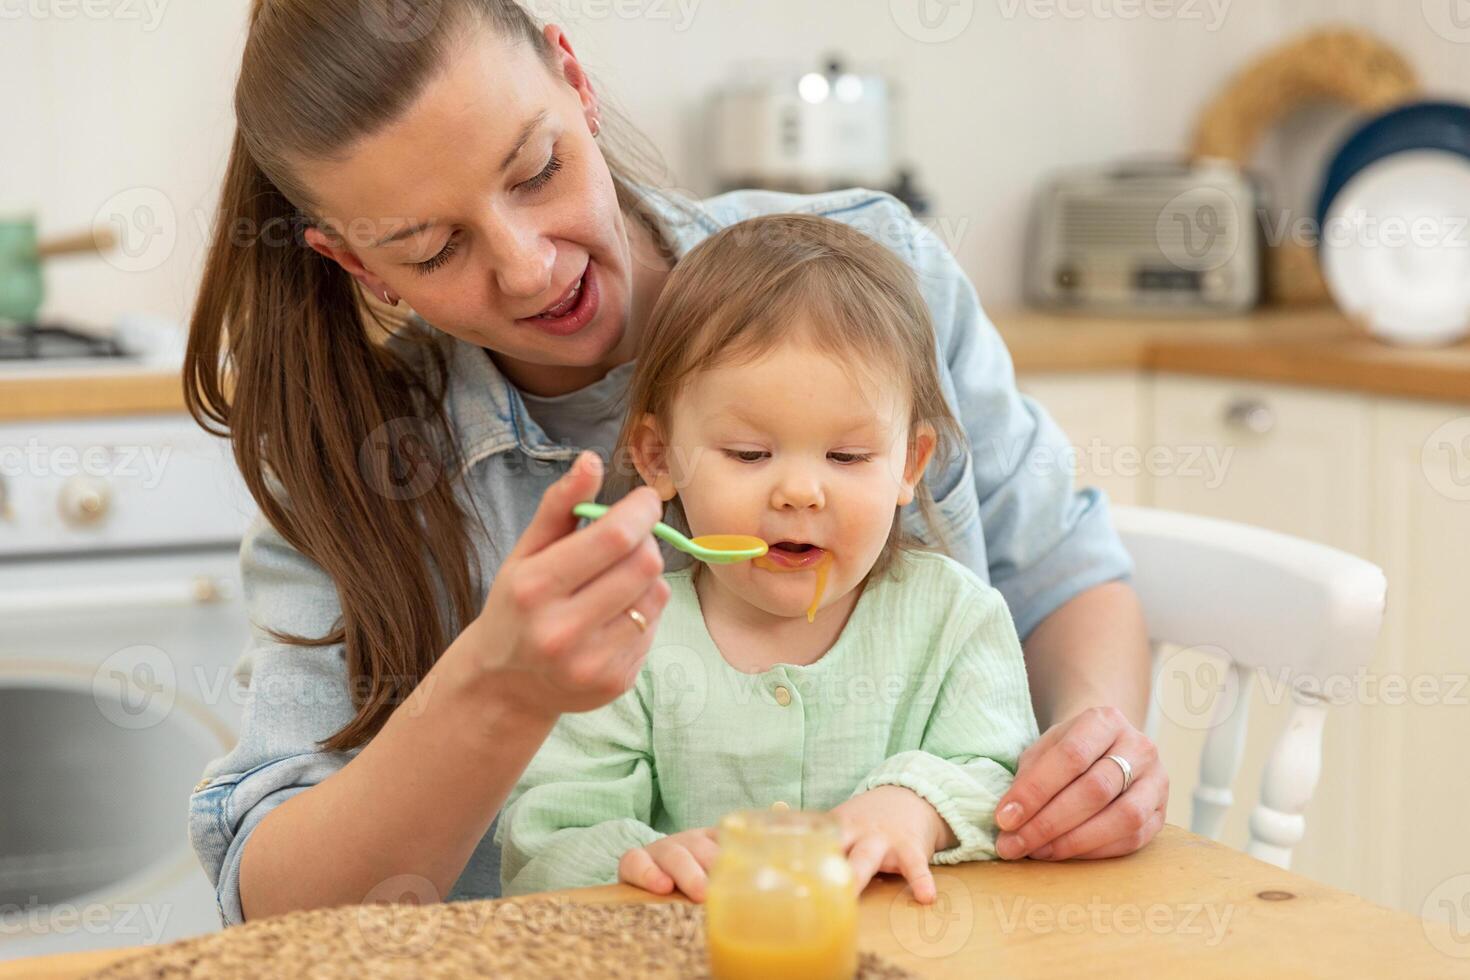 Happy family at home. Mother feeding her baby girl from spoon in kitchen. Little toddler child with messy funny face eats healthy food at home. Young woman mom giving food to kid daughter photo